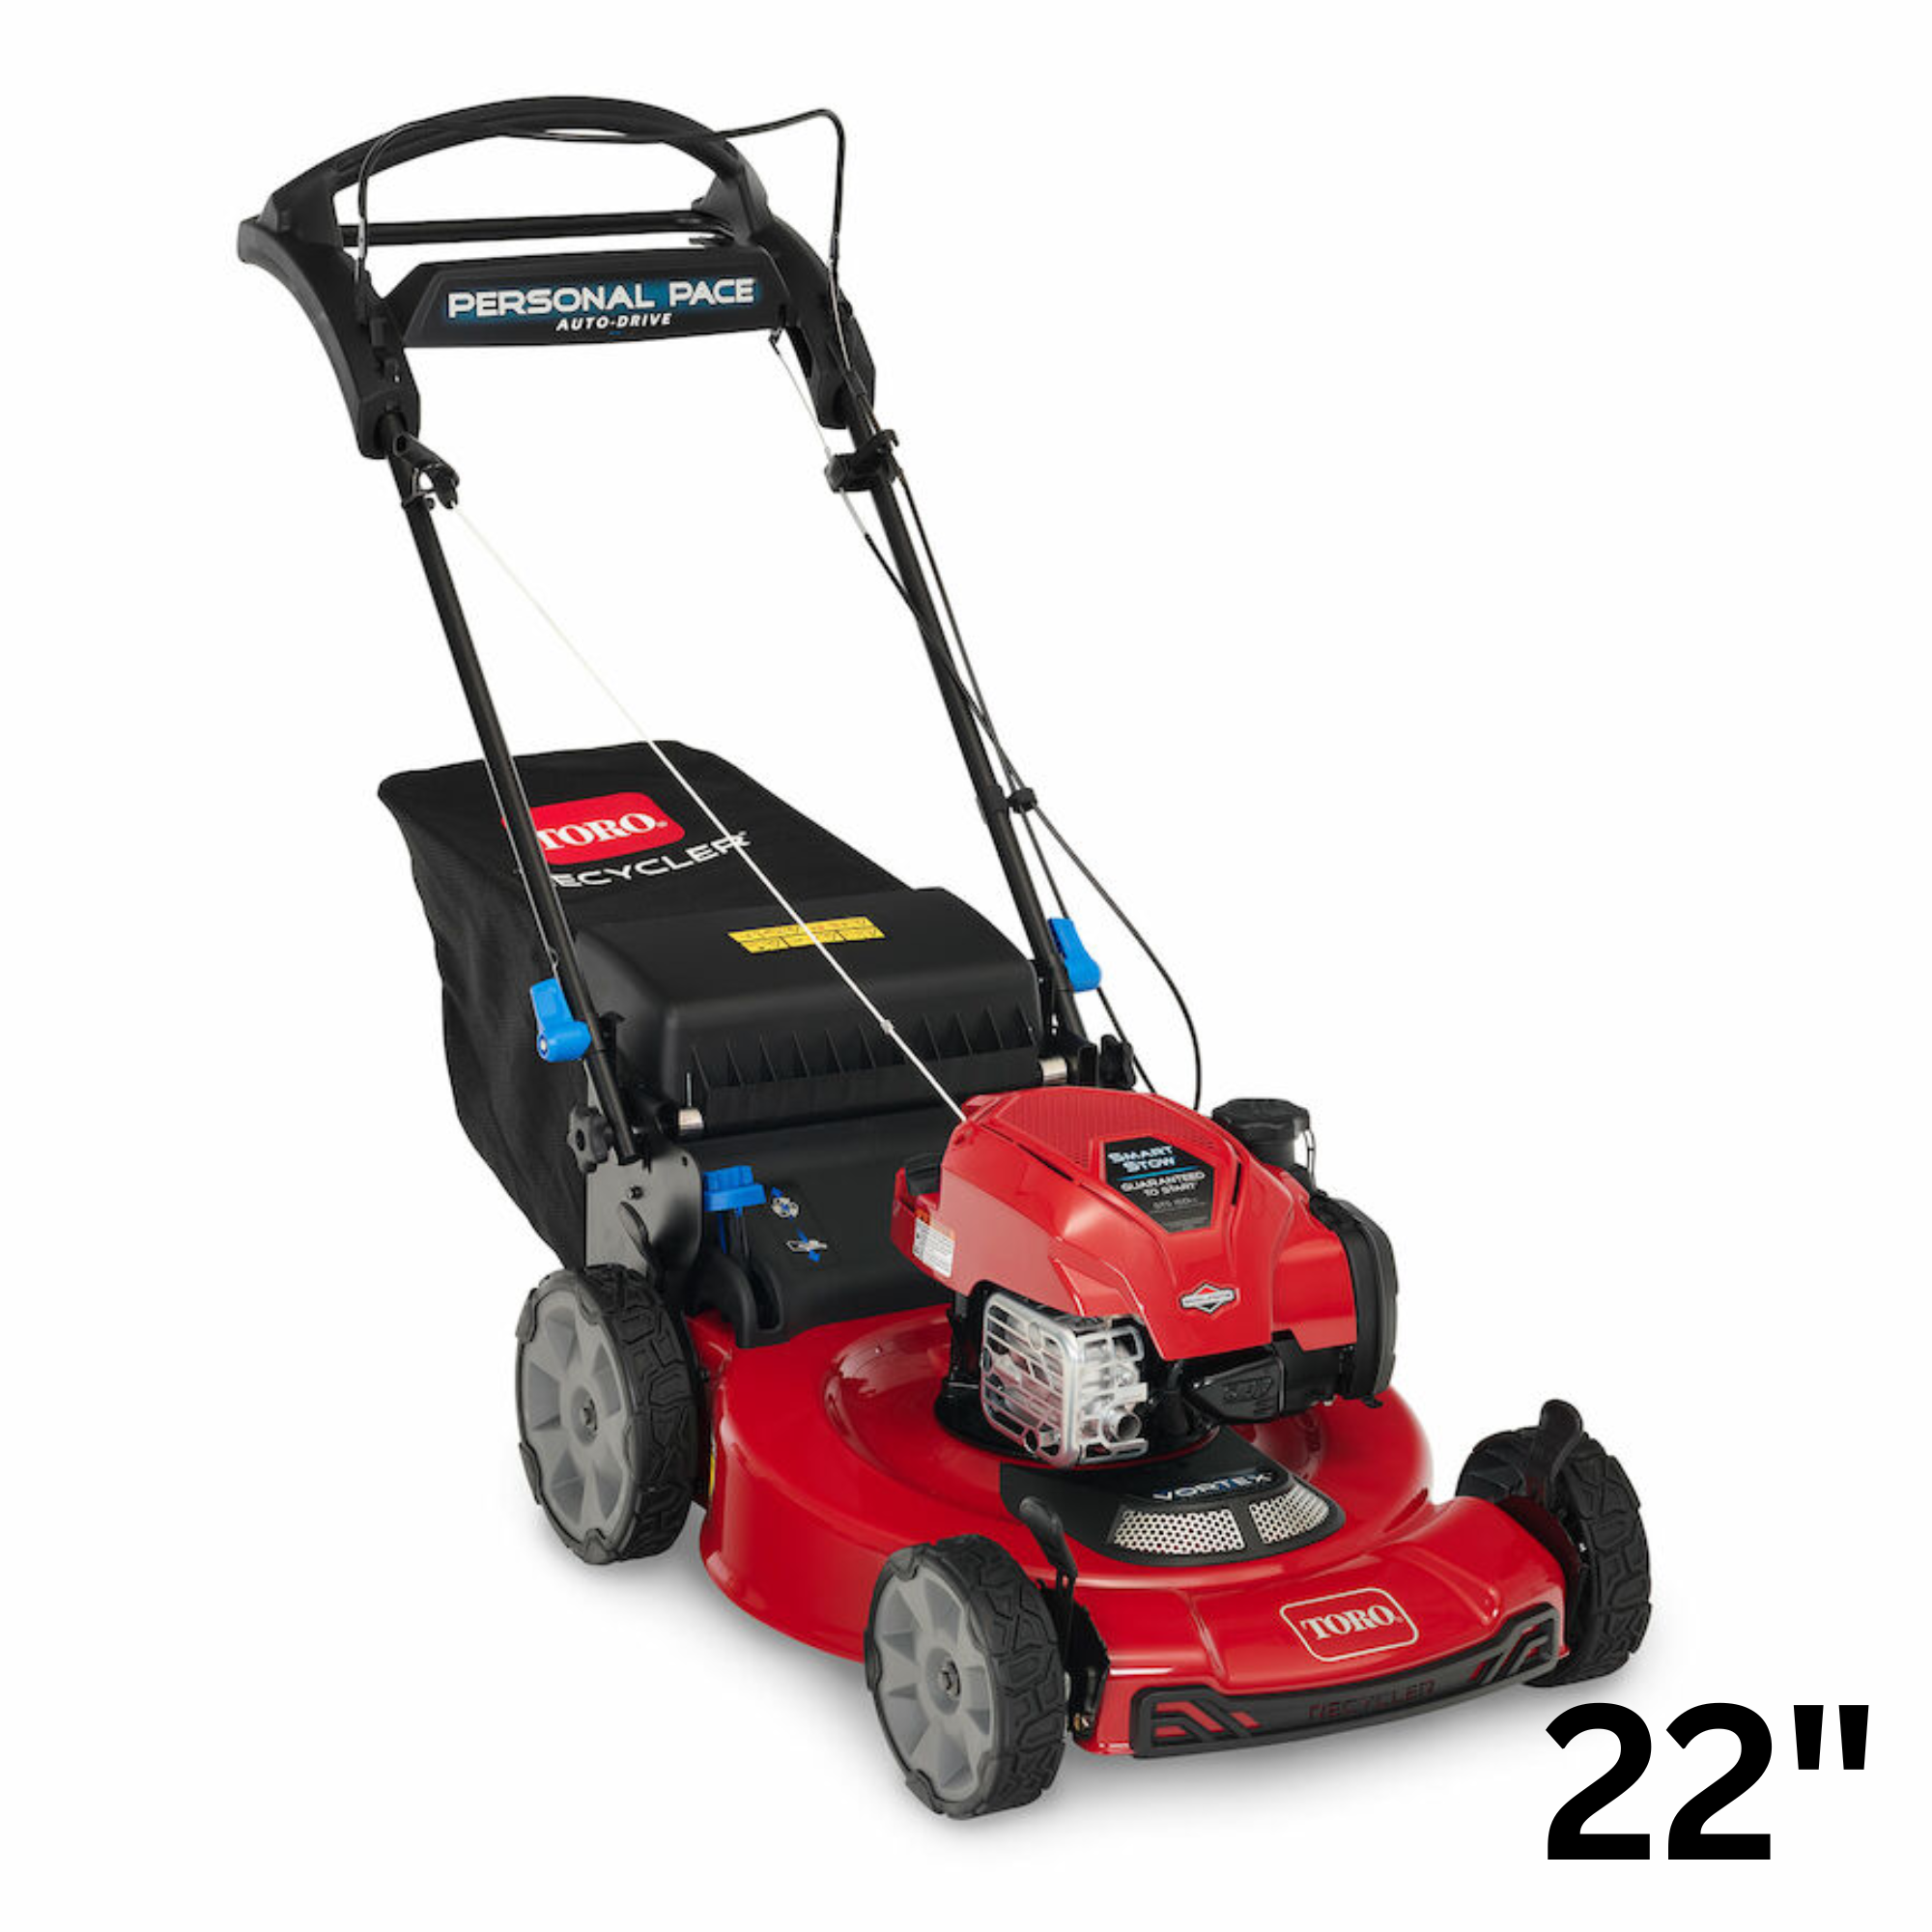 Toro 22" Recycler SMARTSTOW Personal Pace Auto-Drive High Wheel Mower | 21465